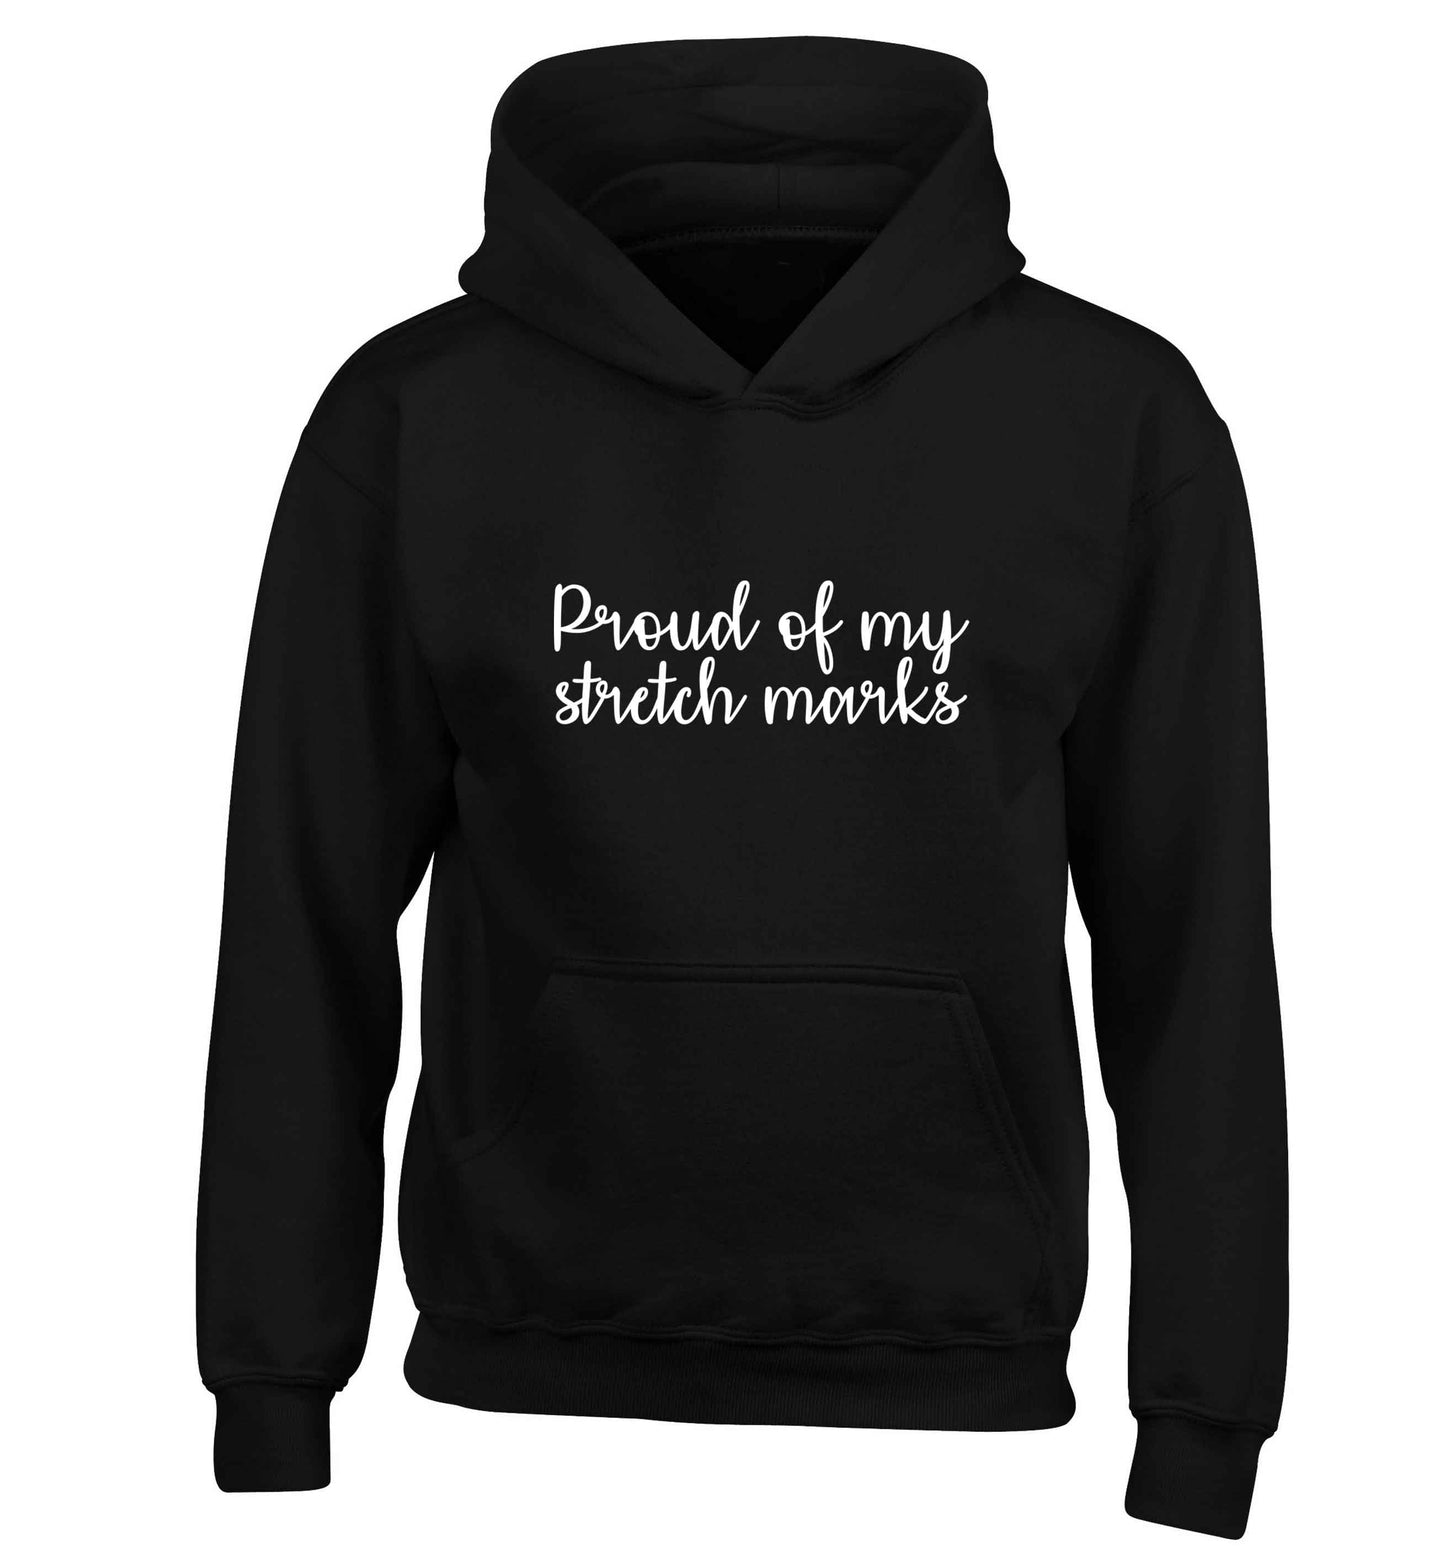 Proud of my stretch marks children's black hoodie 12-13 Years